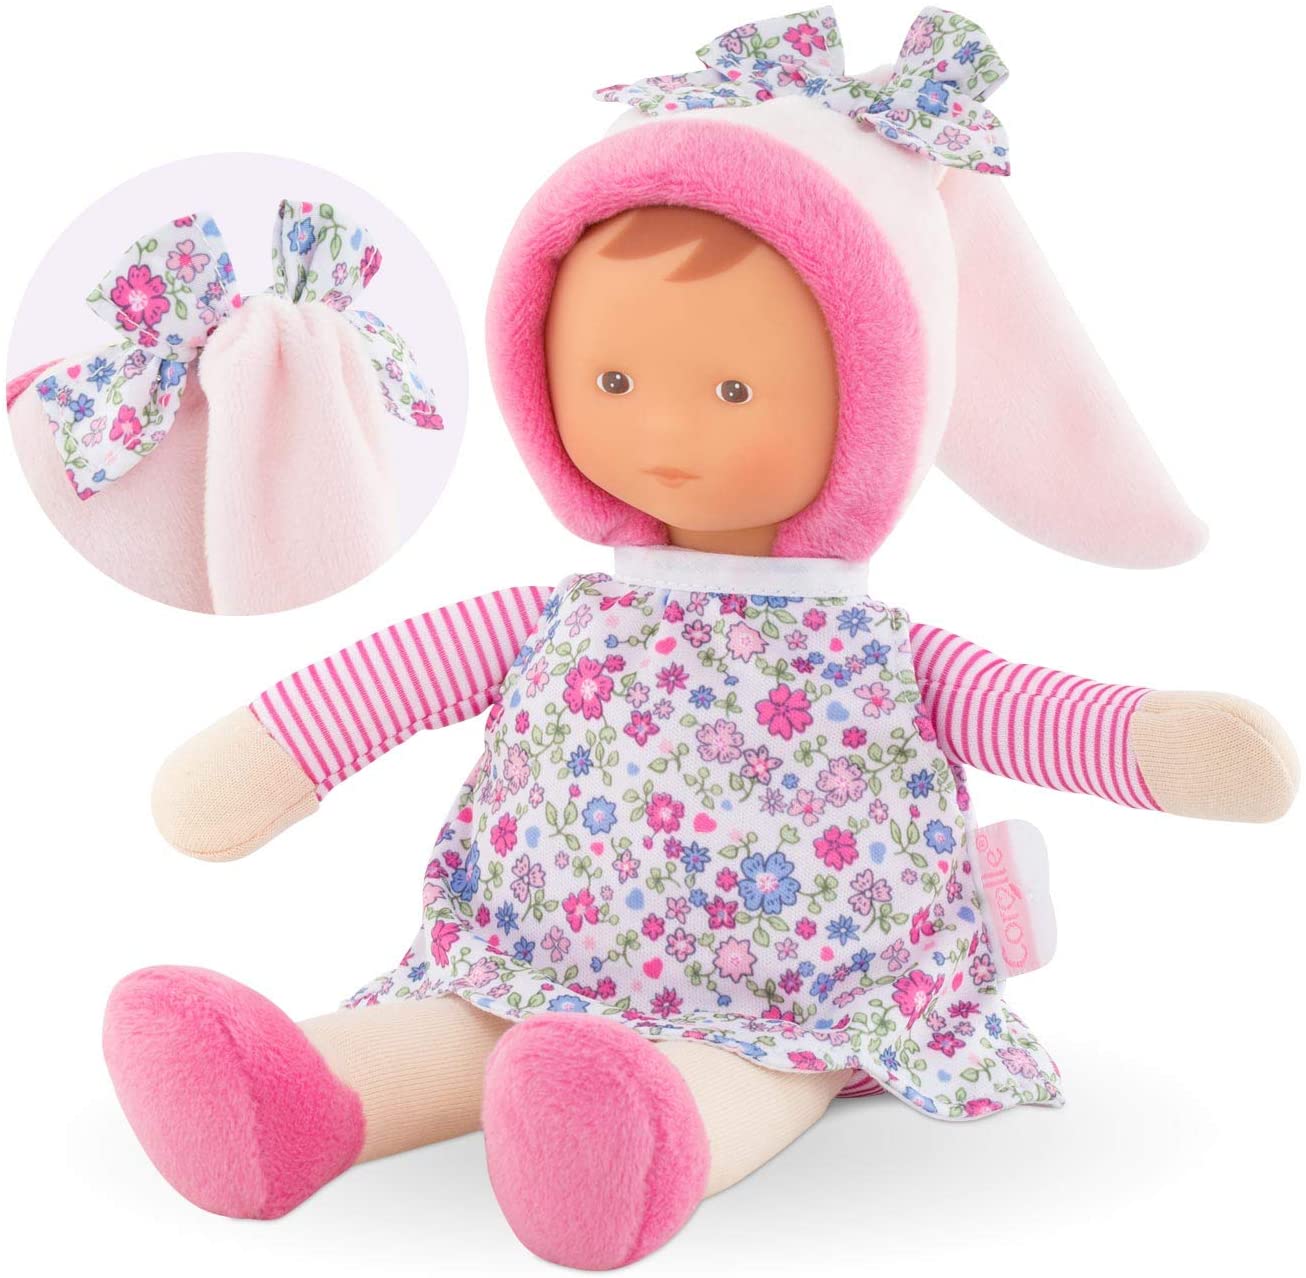 Corolle - Miss Corolle's Flowers - Mon Doudou Soft-body Baby Doll with Vanilla Scent, 9.5" for Ages 0 Months +, Pink